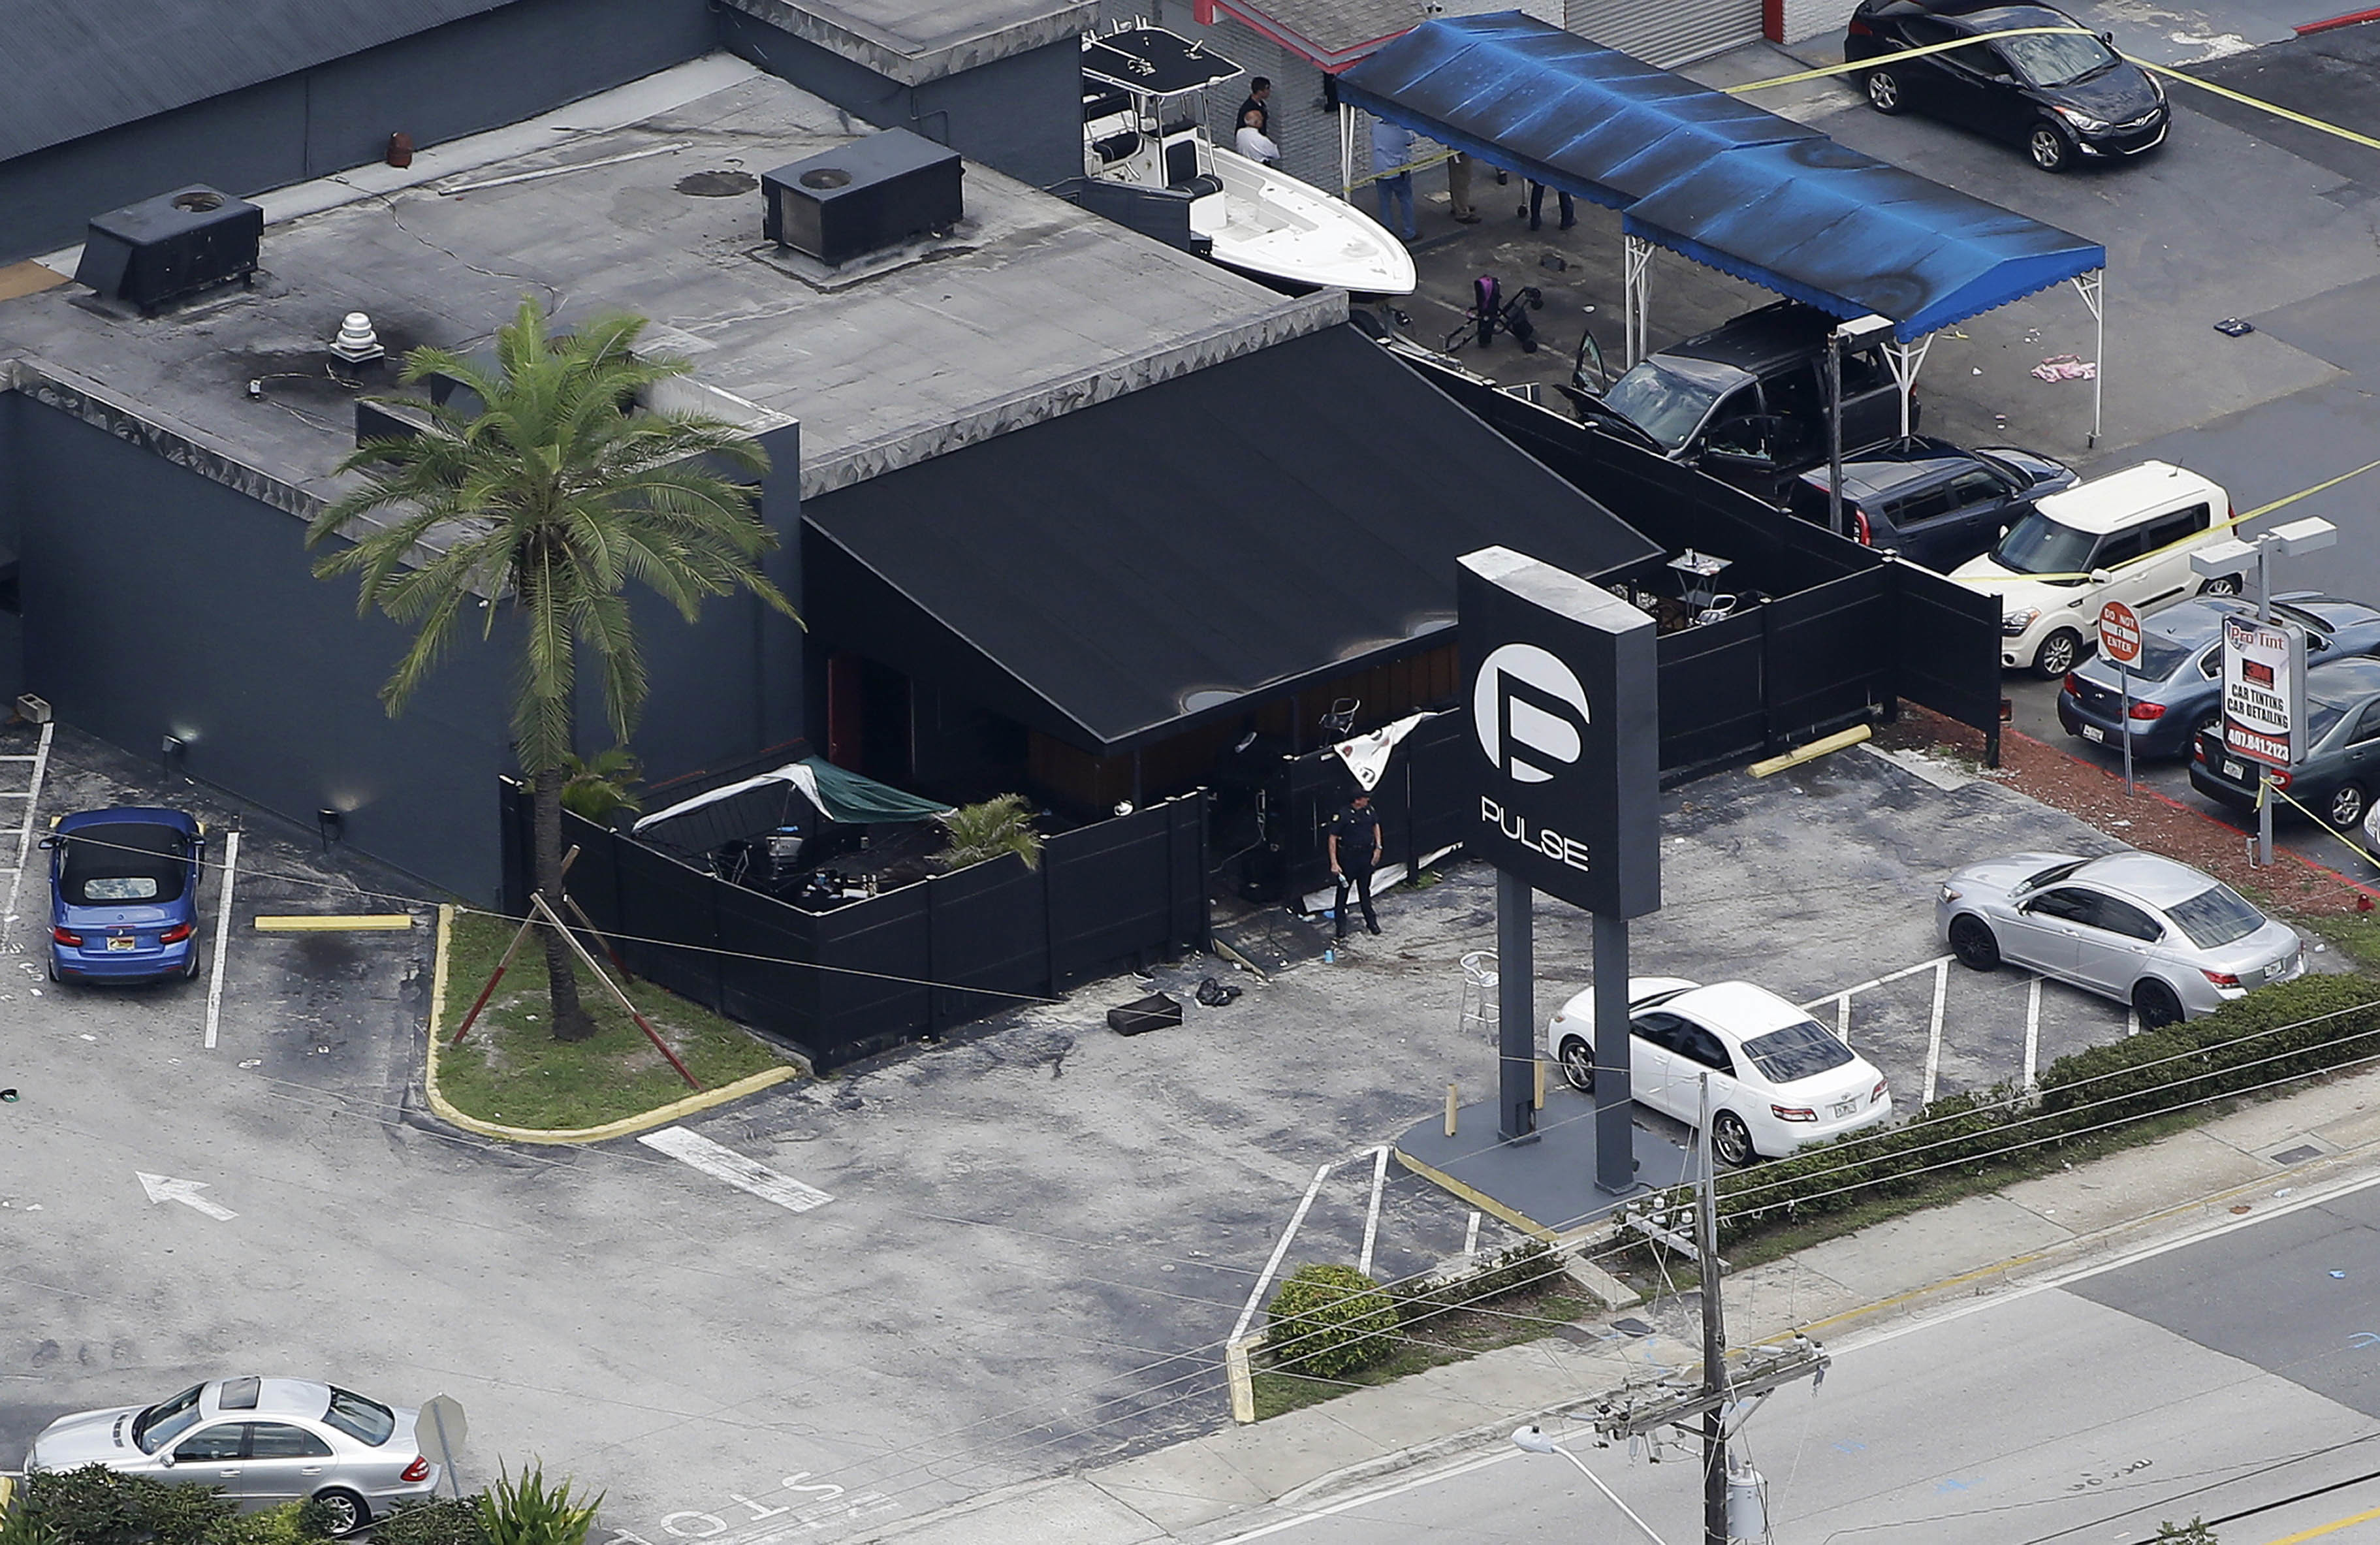 FILE - In this June 12, 2016 file photo, law enforcement officials work at the Pulse gay nightclub in Orlando, Fla., following the a mass shooting. Audio recordings of 911 calls released Tuesday, Aug. 30, by the Orange County Sheriff's Office show mounting frustration by friends and family members who were texting, calling and video-chatting with trapped patrons of the Pulse nightclub where Omar Mateen opened fire in June. A U.S. law enforcement official says the FBI has arrested the wife of the Orlando nightclub shooter. The official says Noor Salman was taken into custody Monday, Jan. 16, 2017, in the San Francisco area and is due in court Tuesday in California. She's facing charges in Florida including obstruction of justice.